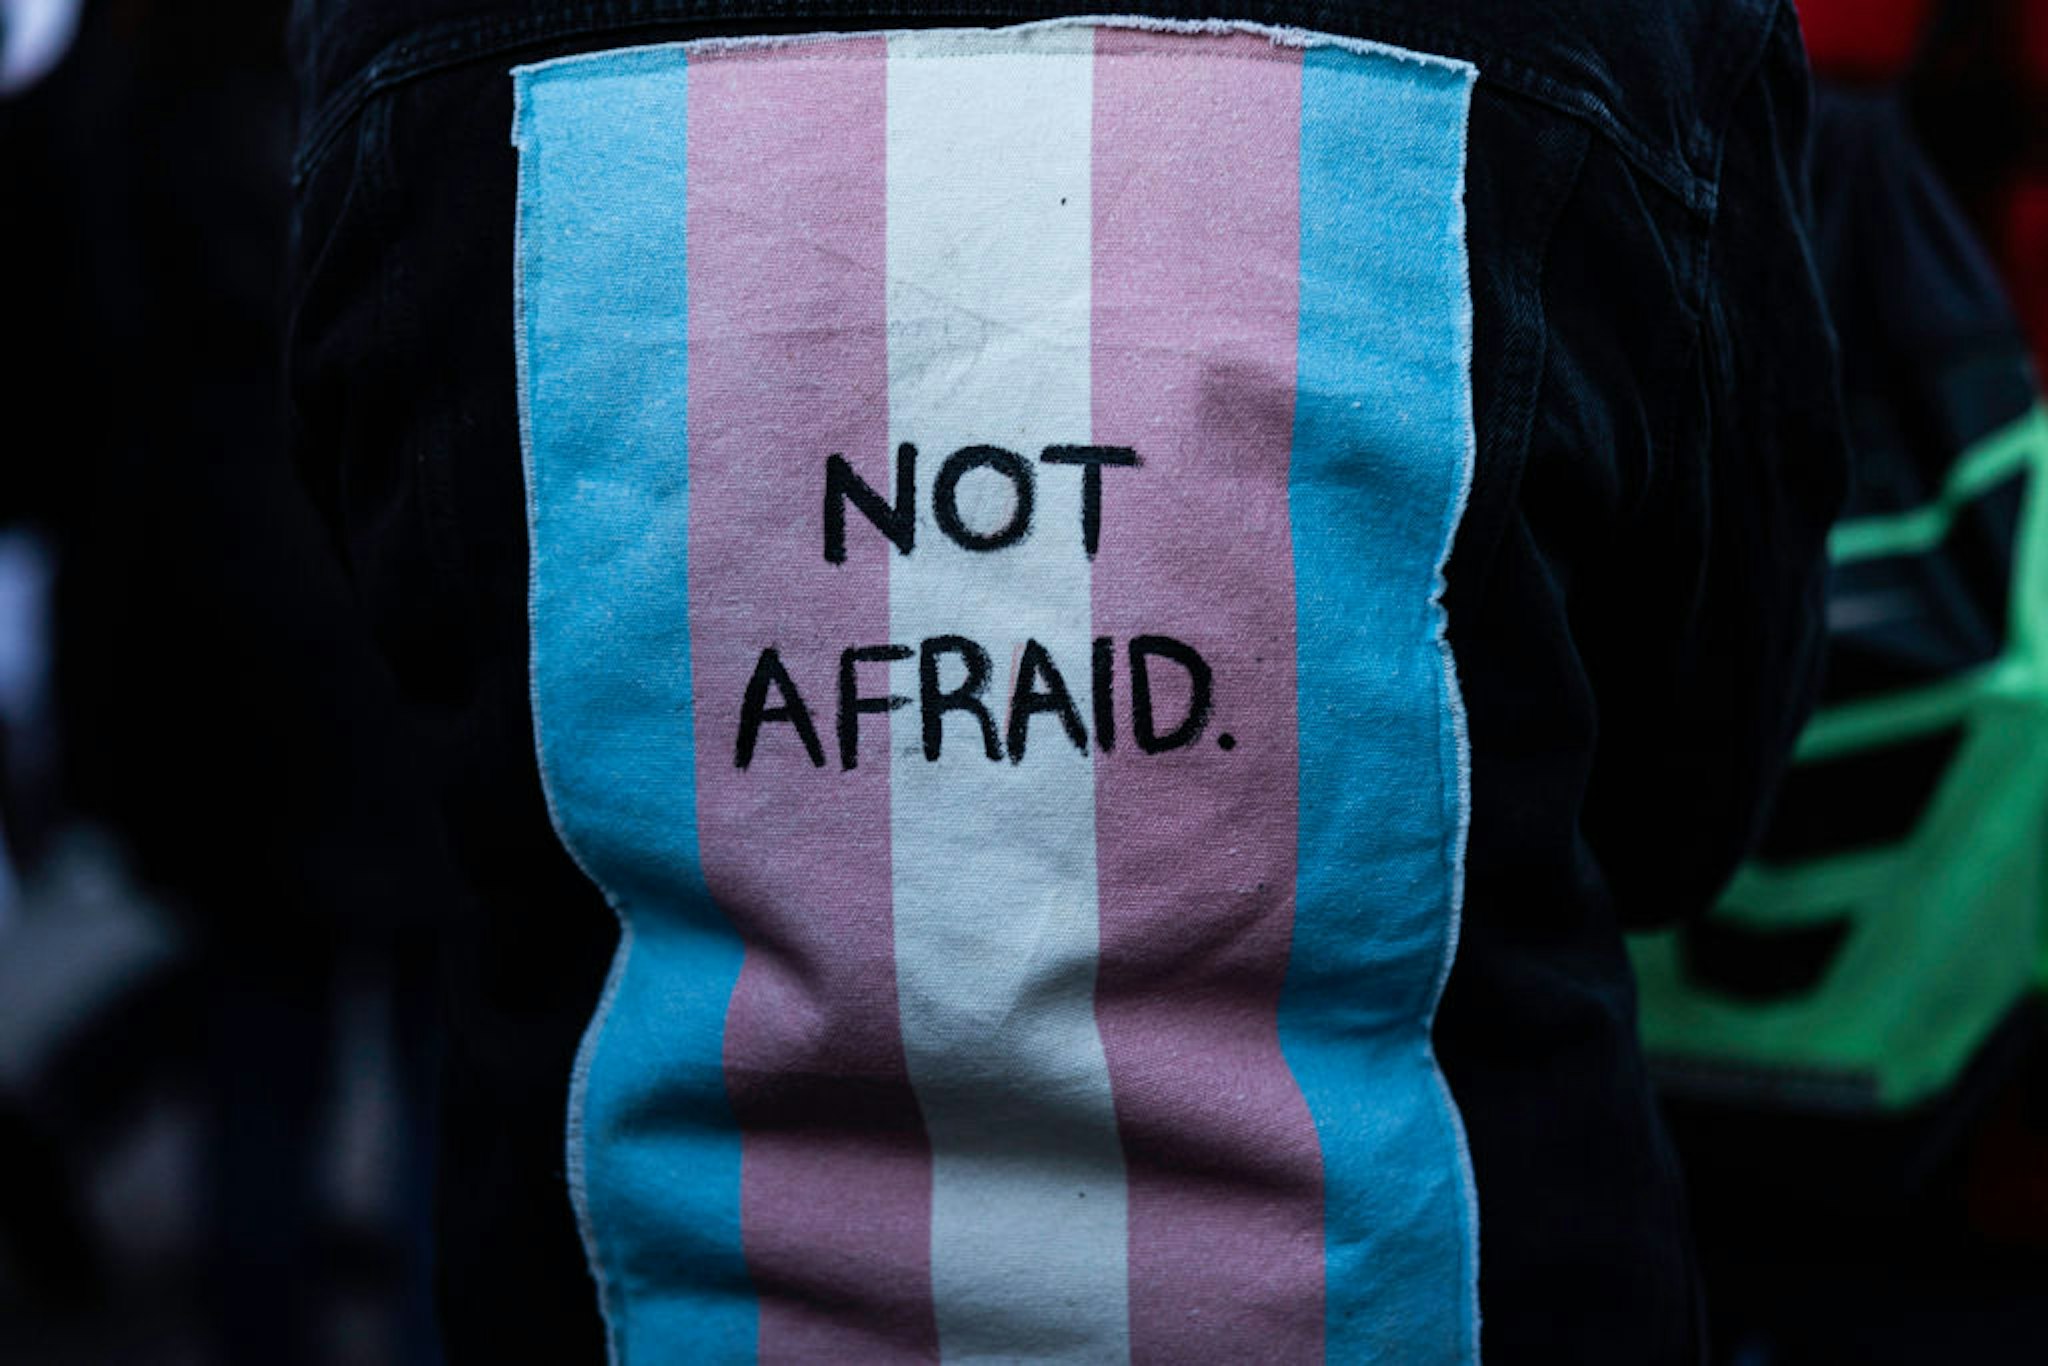 NEW YORK, NY - NOVEMBER 20: A person wears a vest with a trans flag on the back with the words Not afraid during a memorial honoring trans individuals killed by gun violence held by Gays Against Guns on November 20, 2022 in New York City. Although planned in advance, this event coincides with a mass shooting in Colorado at a bar designated as a safe place for the LGBTQIA+ community. (Photo by Alex Kent/Getty Images)